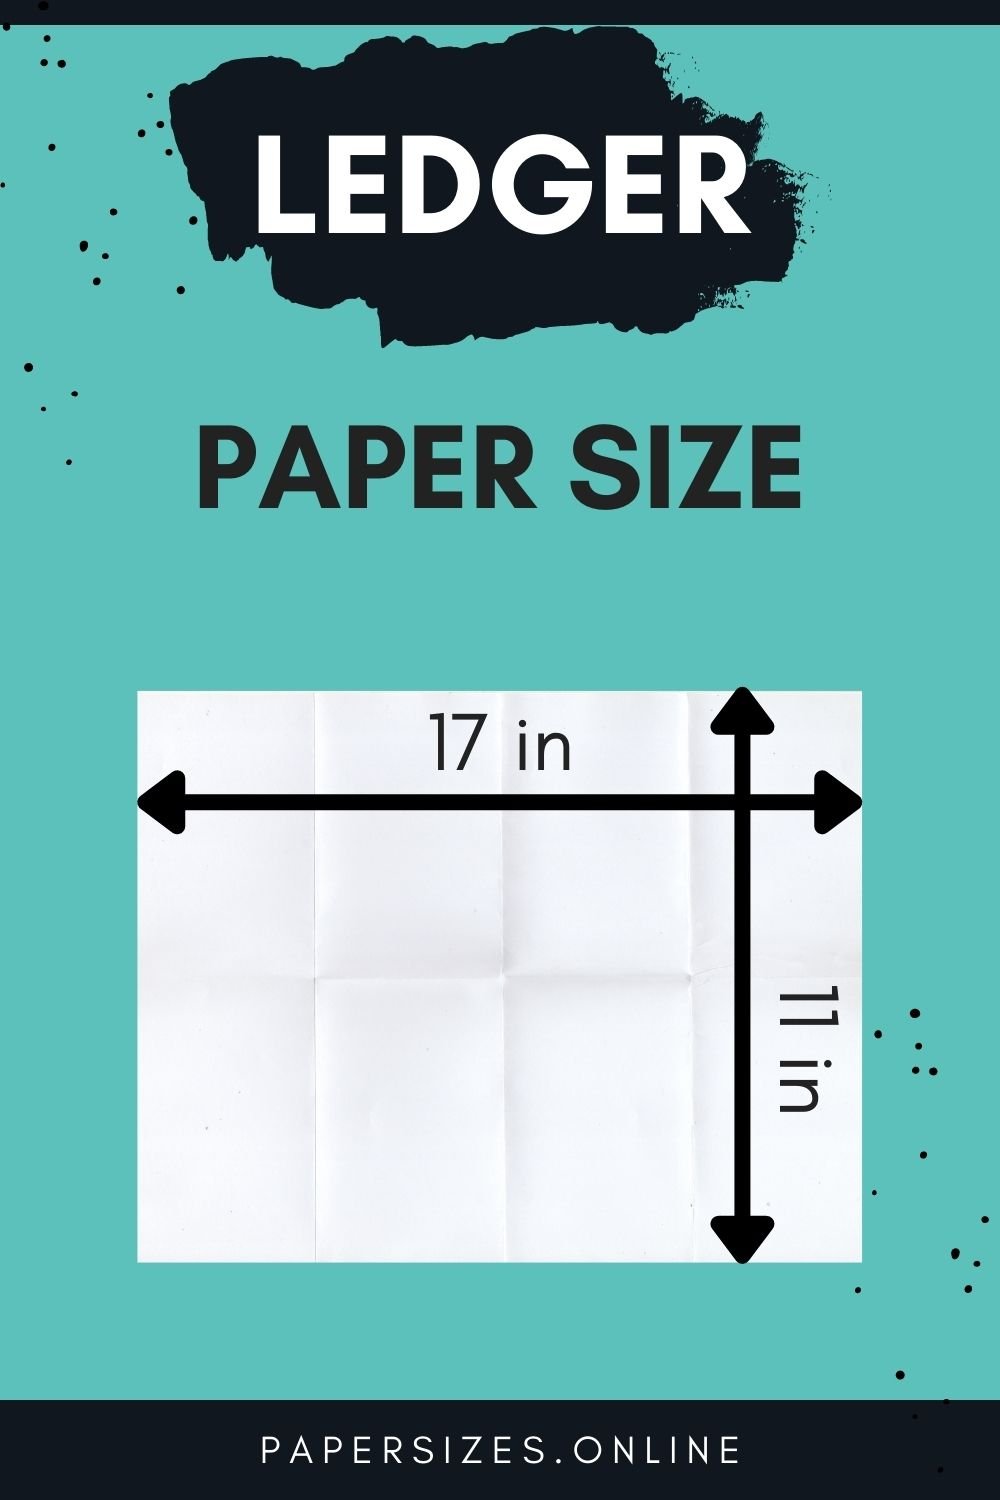 Ledger paper size in inches